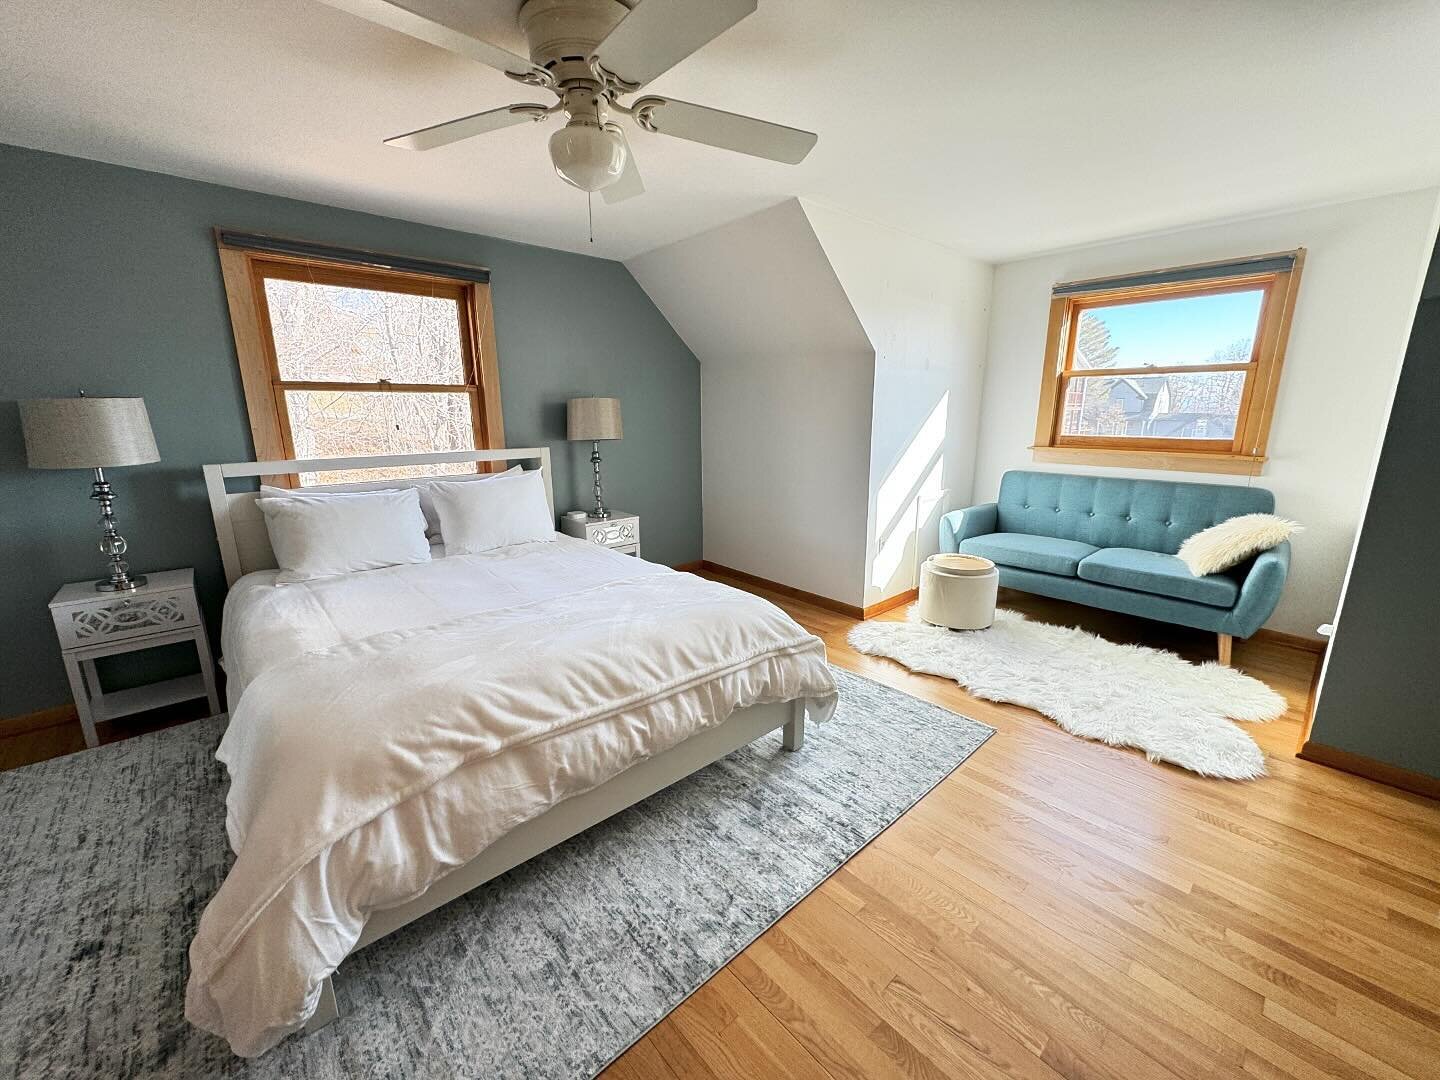 What if we told you there&rsquo;s a new vacation rental in town? Perfect for larger groups, the newest four bedroom oasis located in the heart of downtown Bayfield and walkable to everything is almost ready for our first guests! Meet: Garden Terrace.